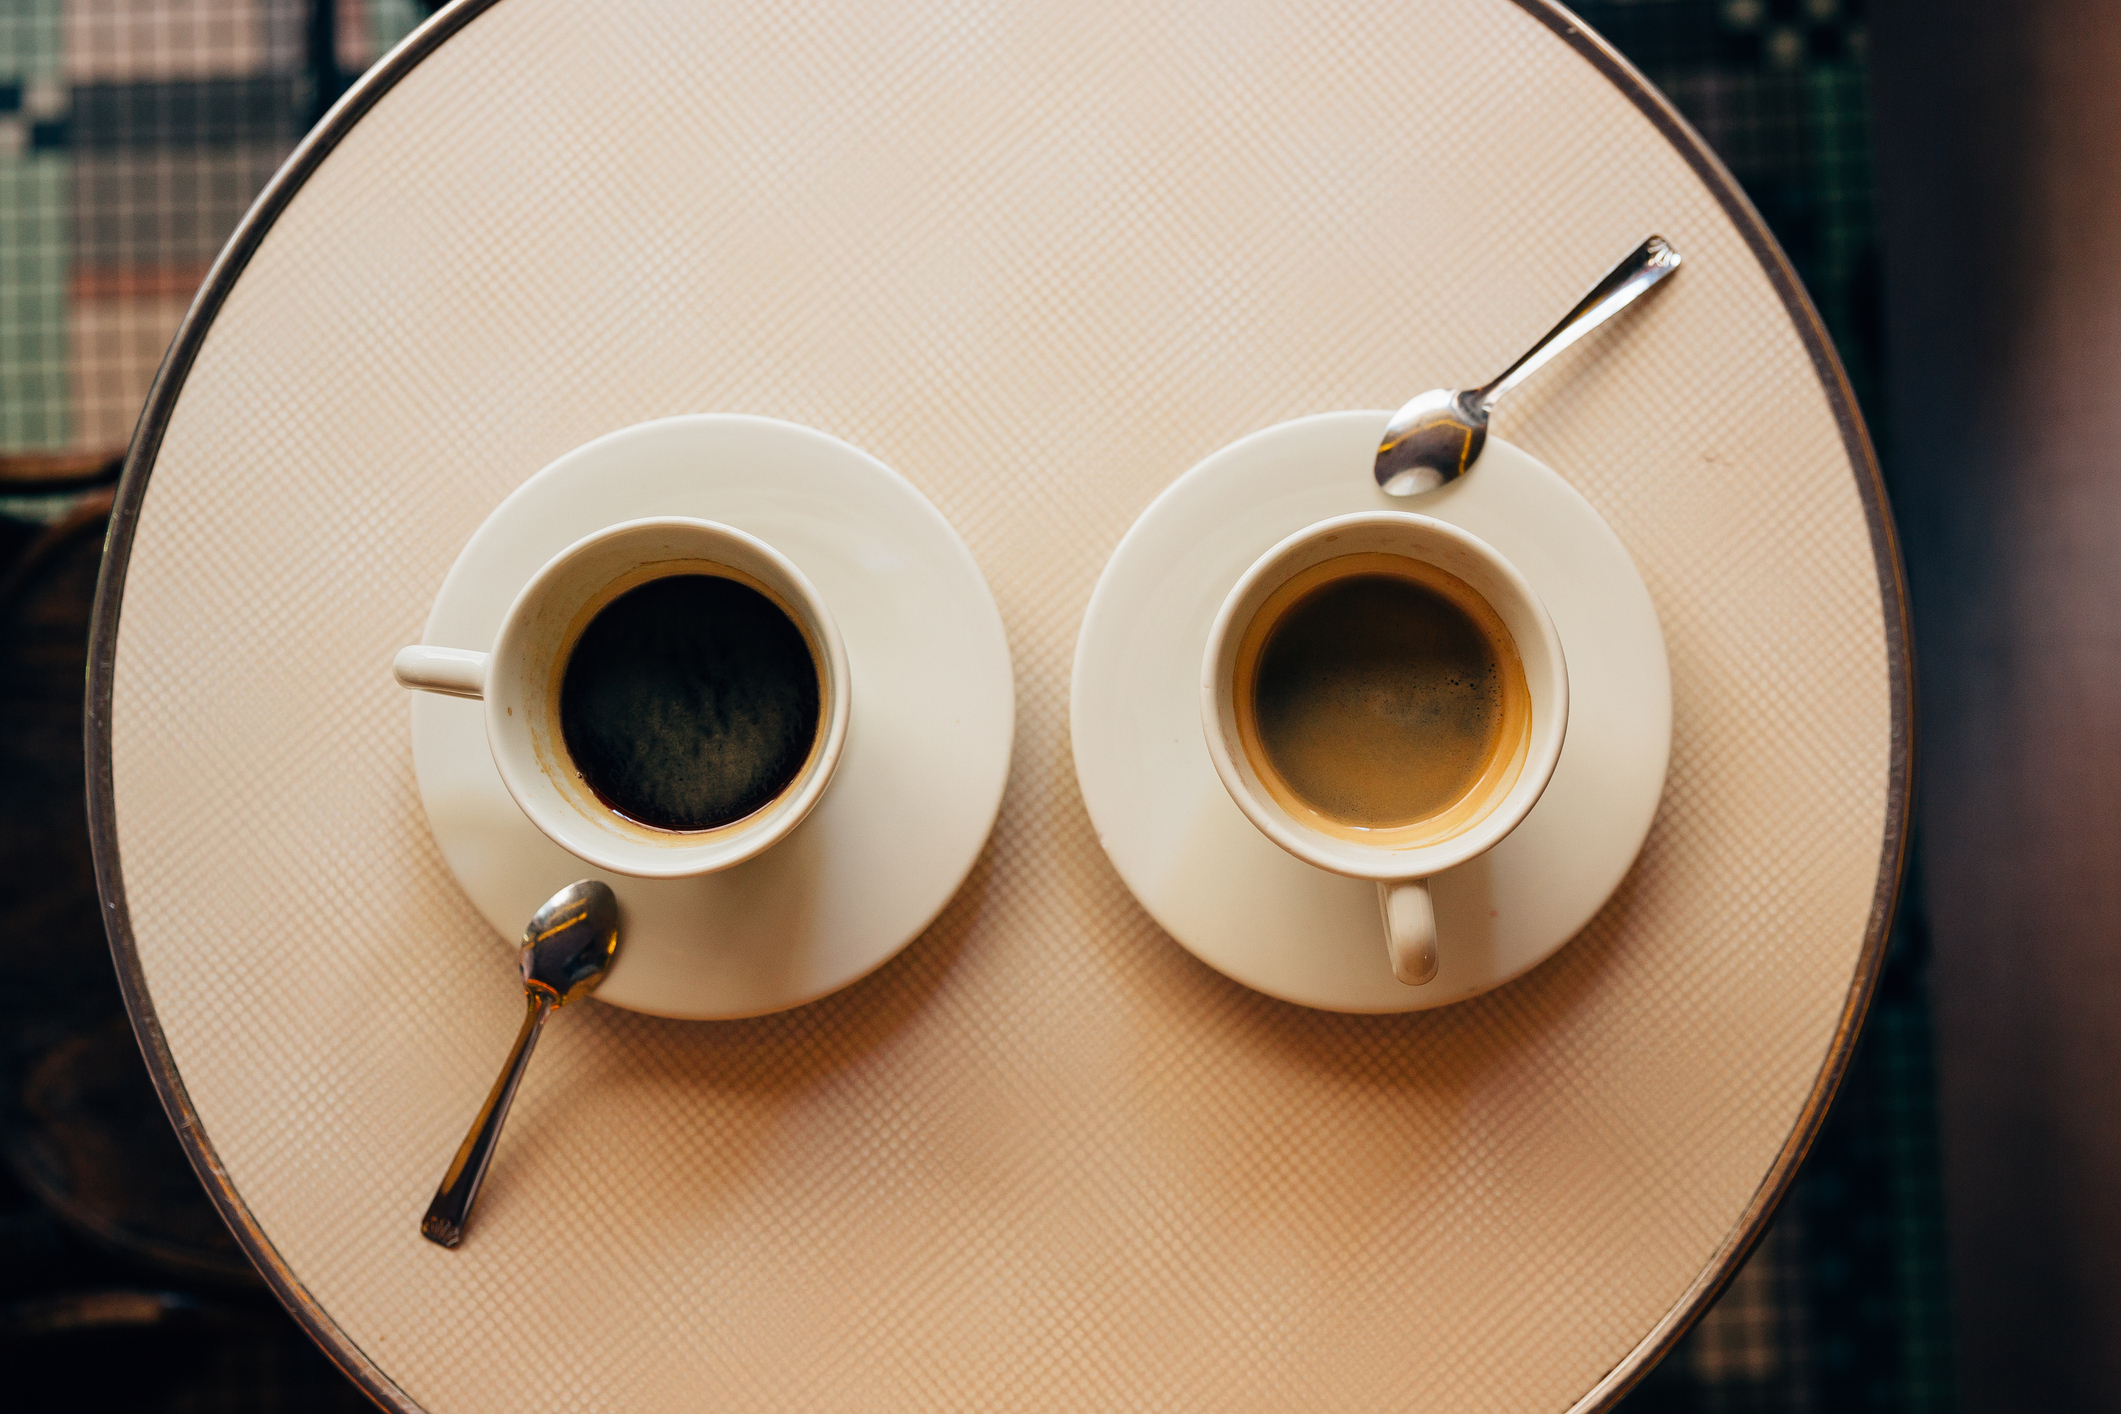 Two cups of coffee with spoons on the saucers are placed on a round table, viewed from above